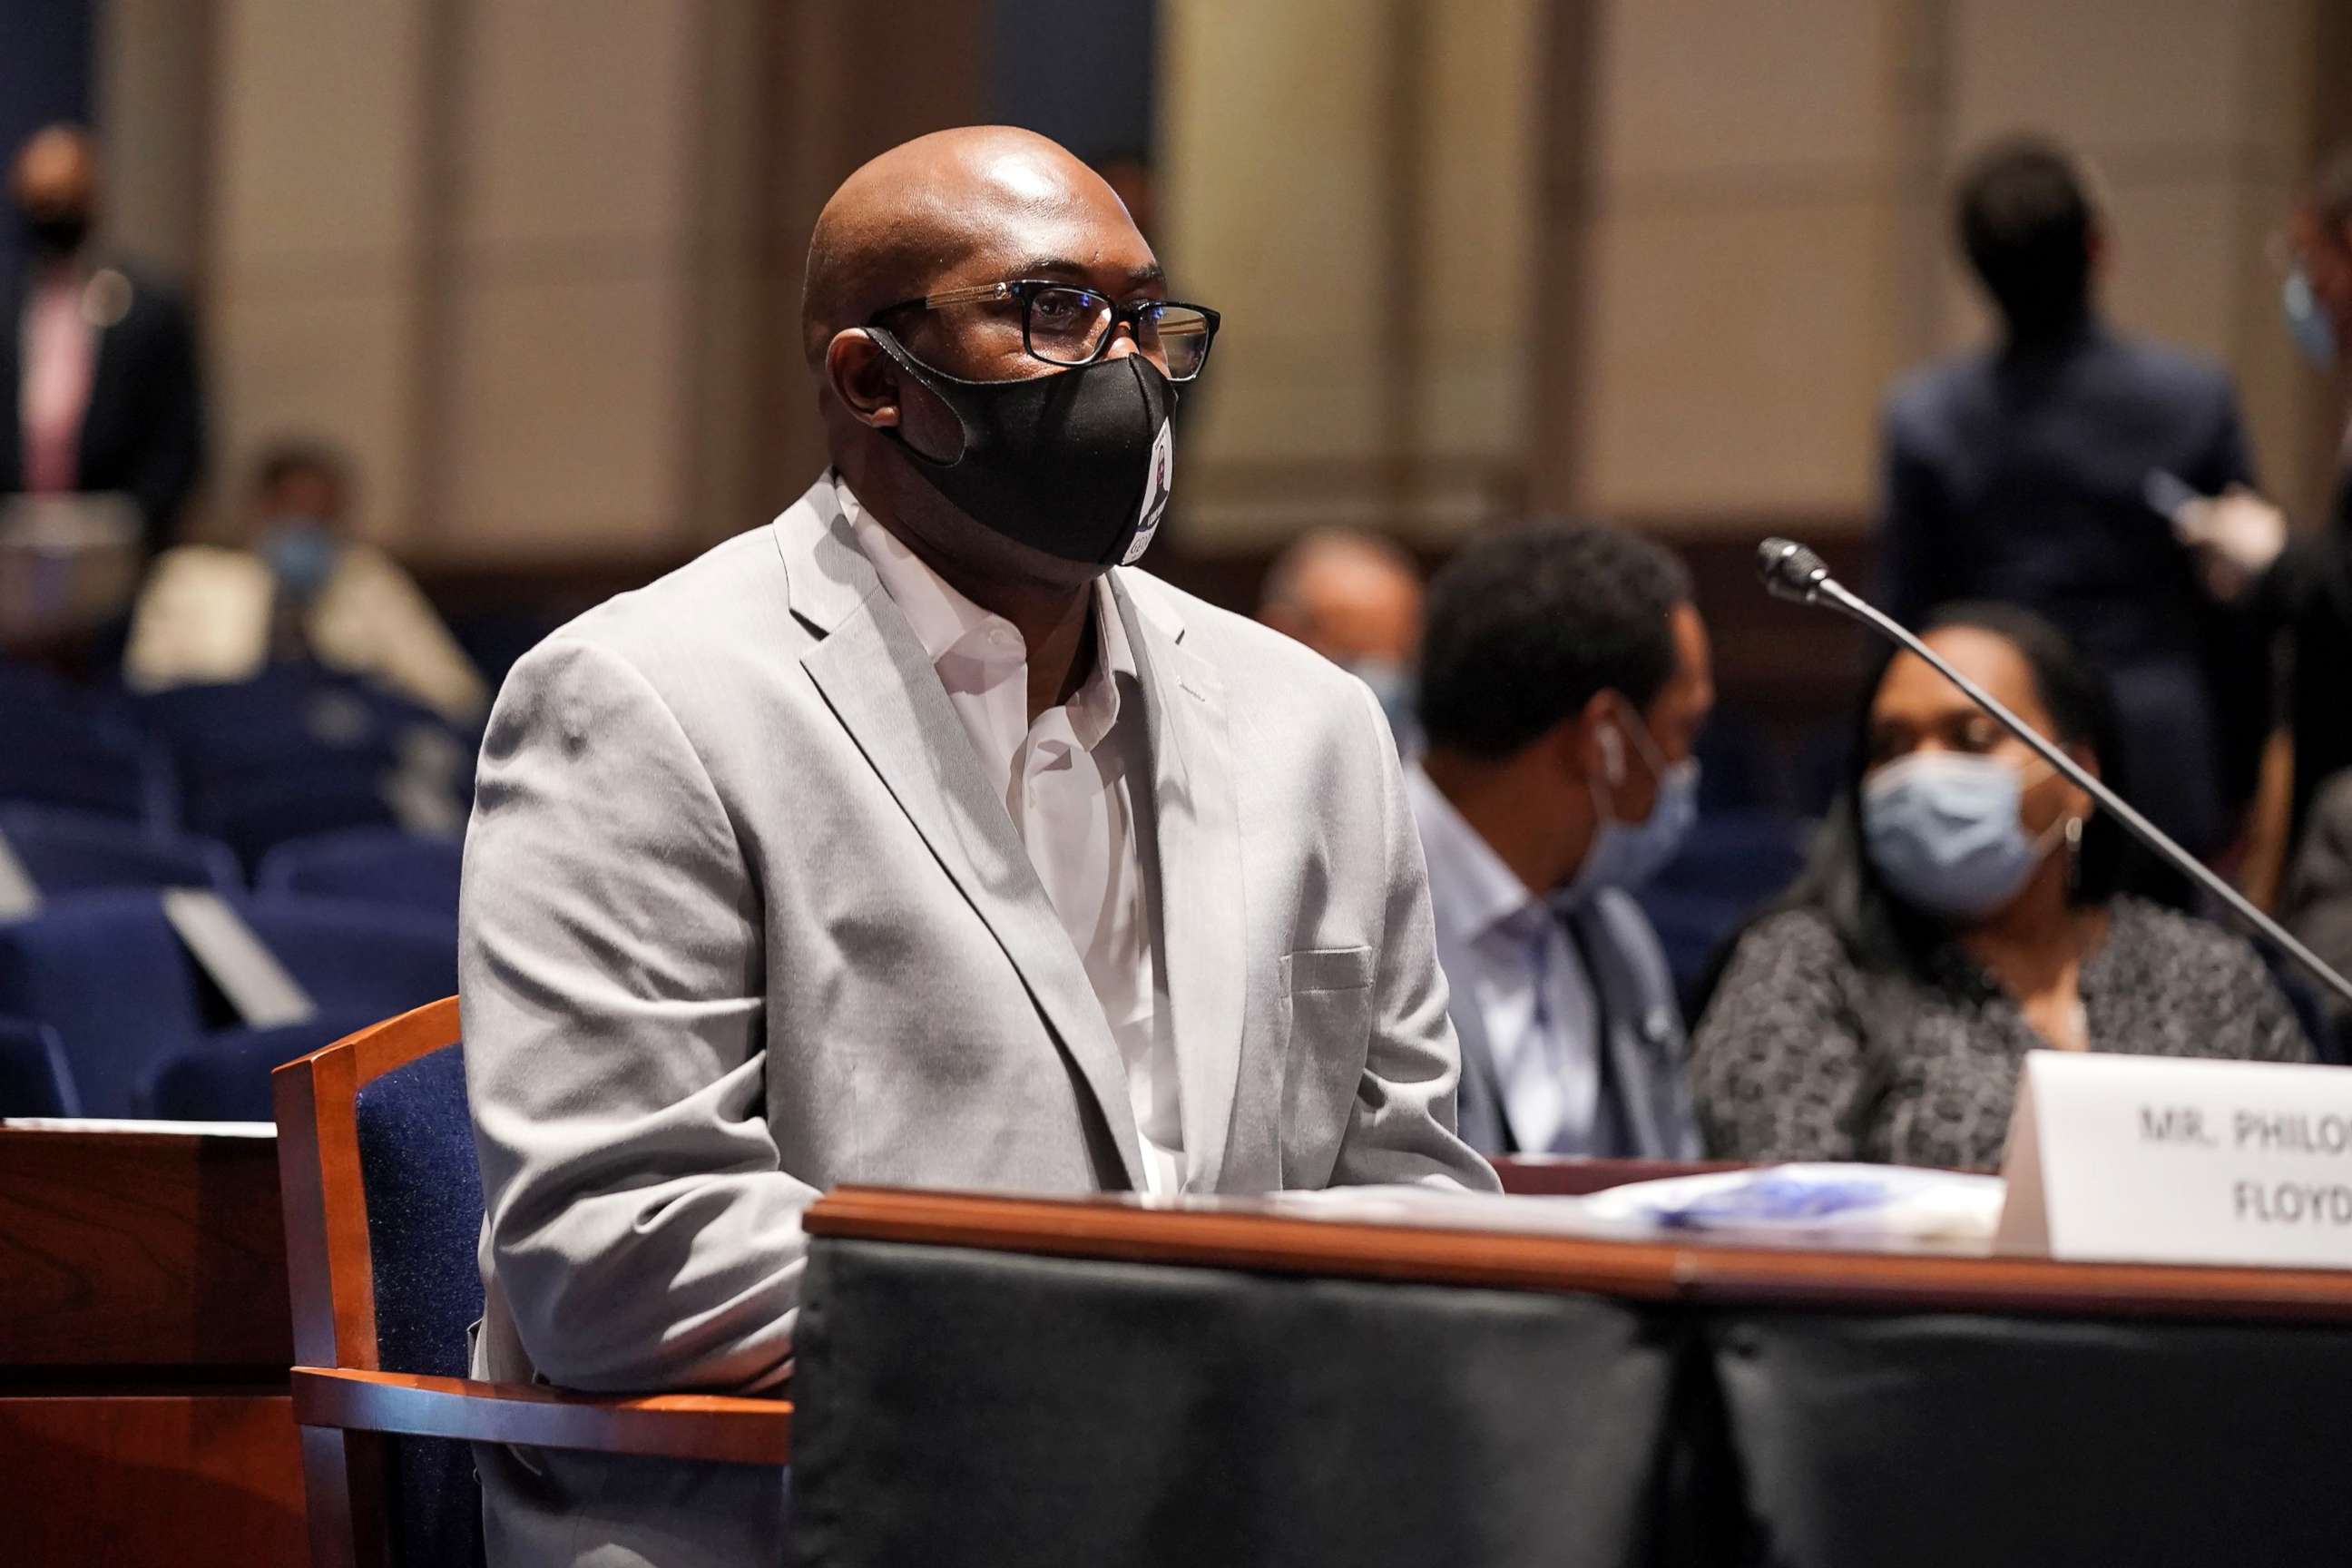 PHOTO: Philonise Floyd, brother of George Floyd, arrives for a House Judiciary Committee hearing to discuss police brutality and racial profiling, June 10, 2020 in Washington, D.C.